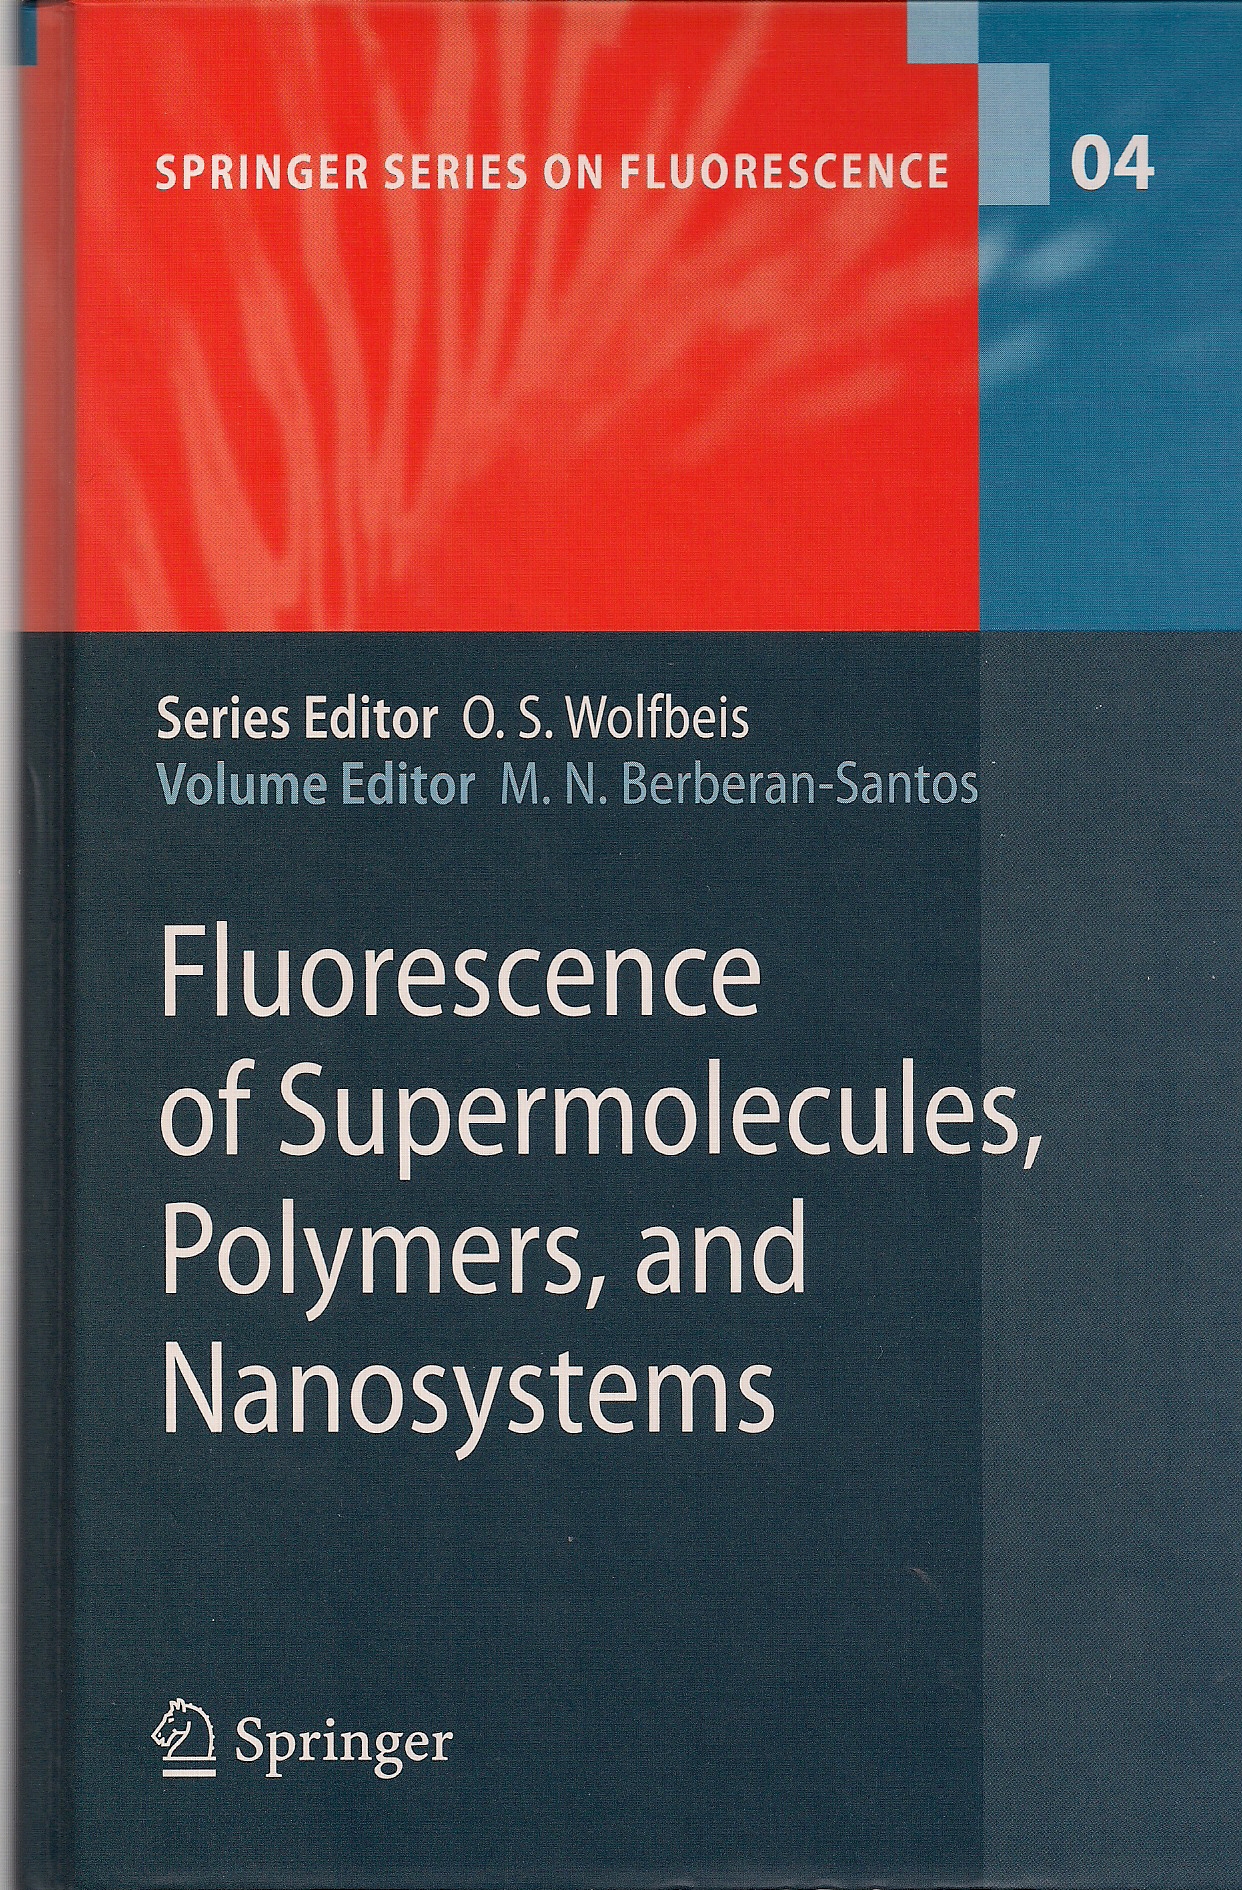 Fluorescence of Supermolecules,
                              Polymers and Nanosystems